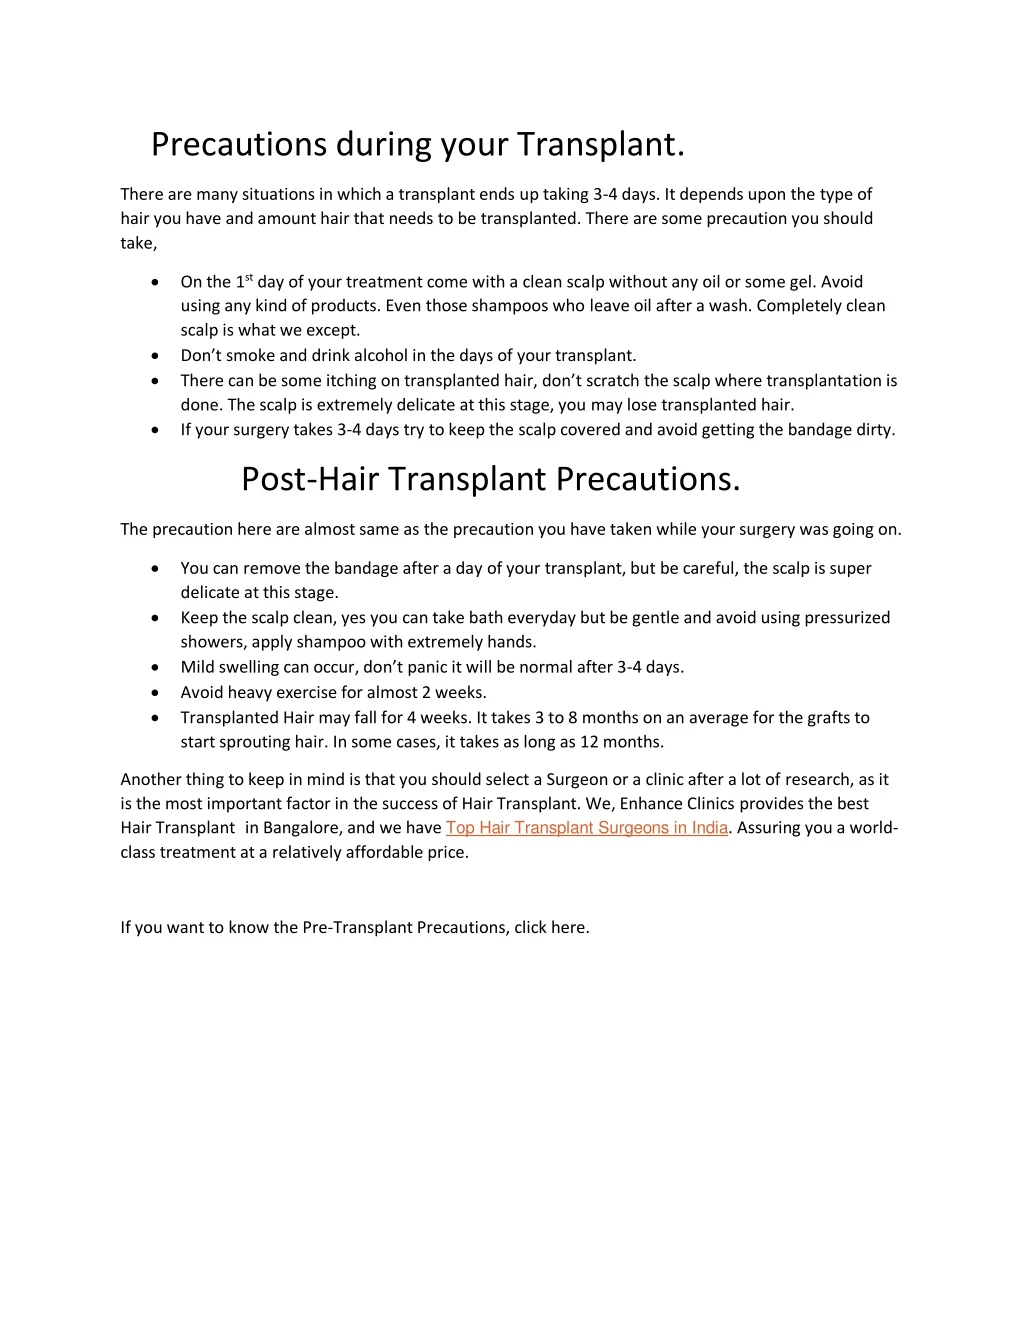 precautions during your transplant